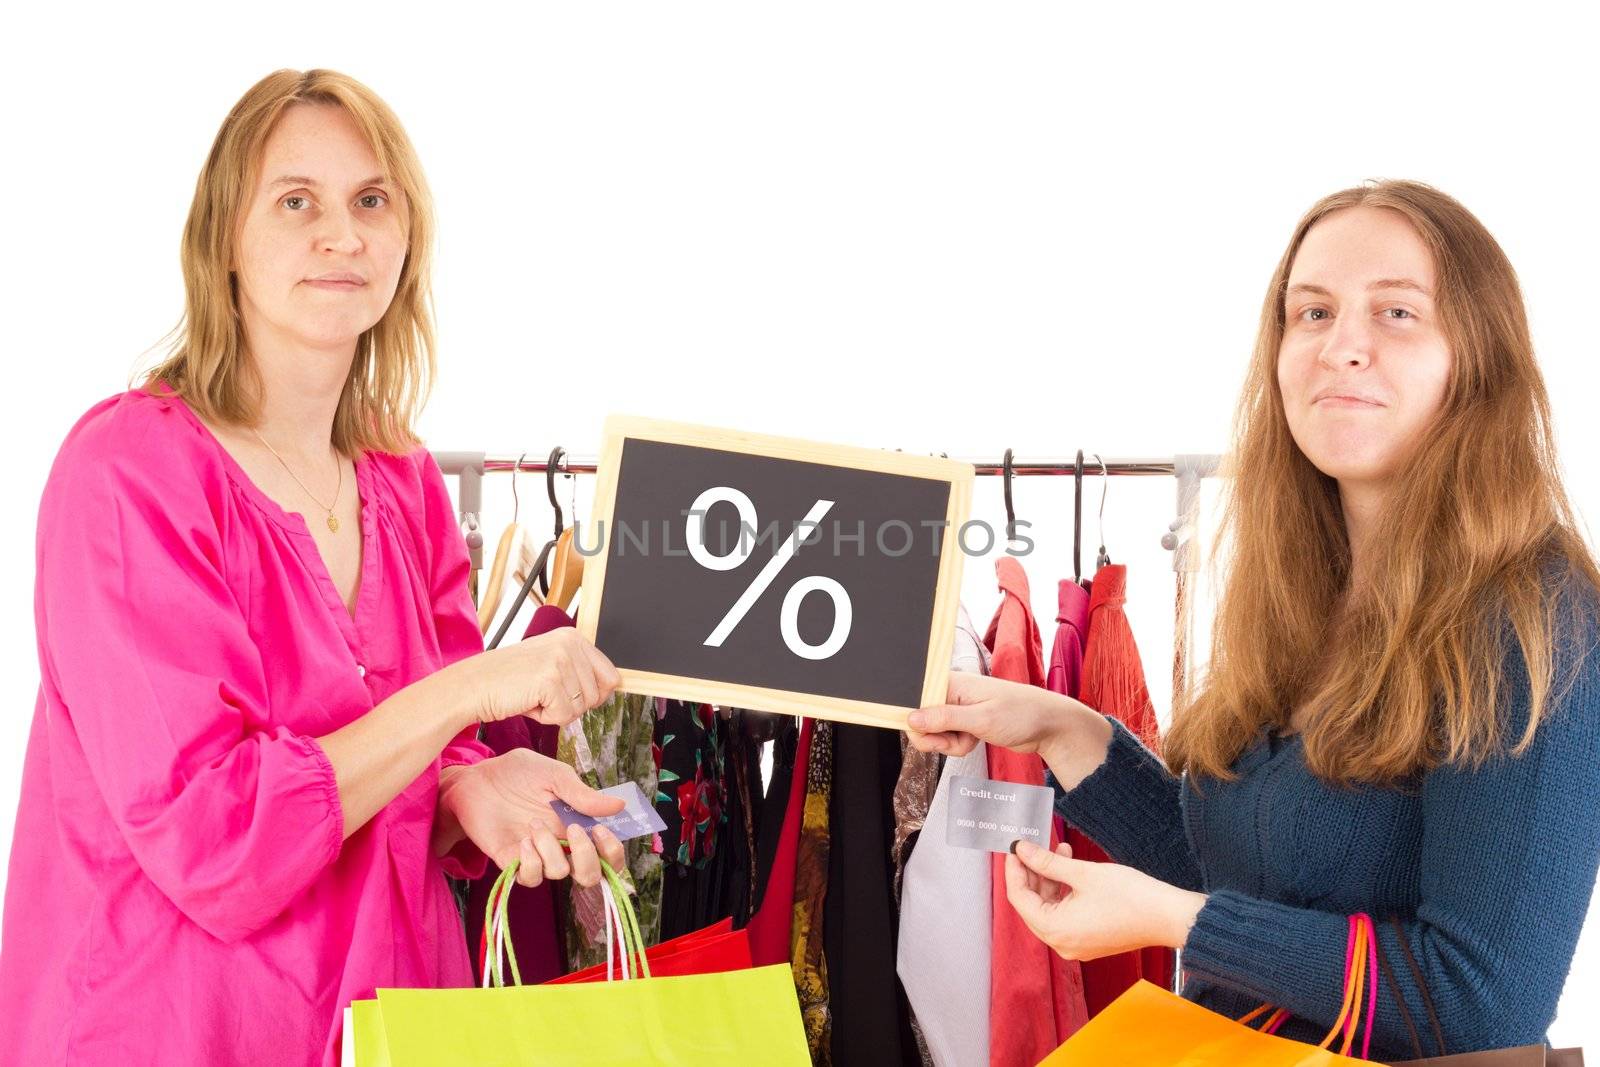 People on shopping tour: percent